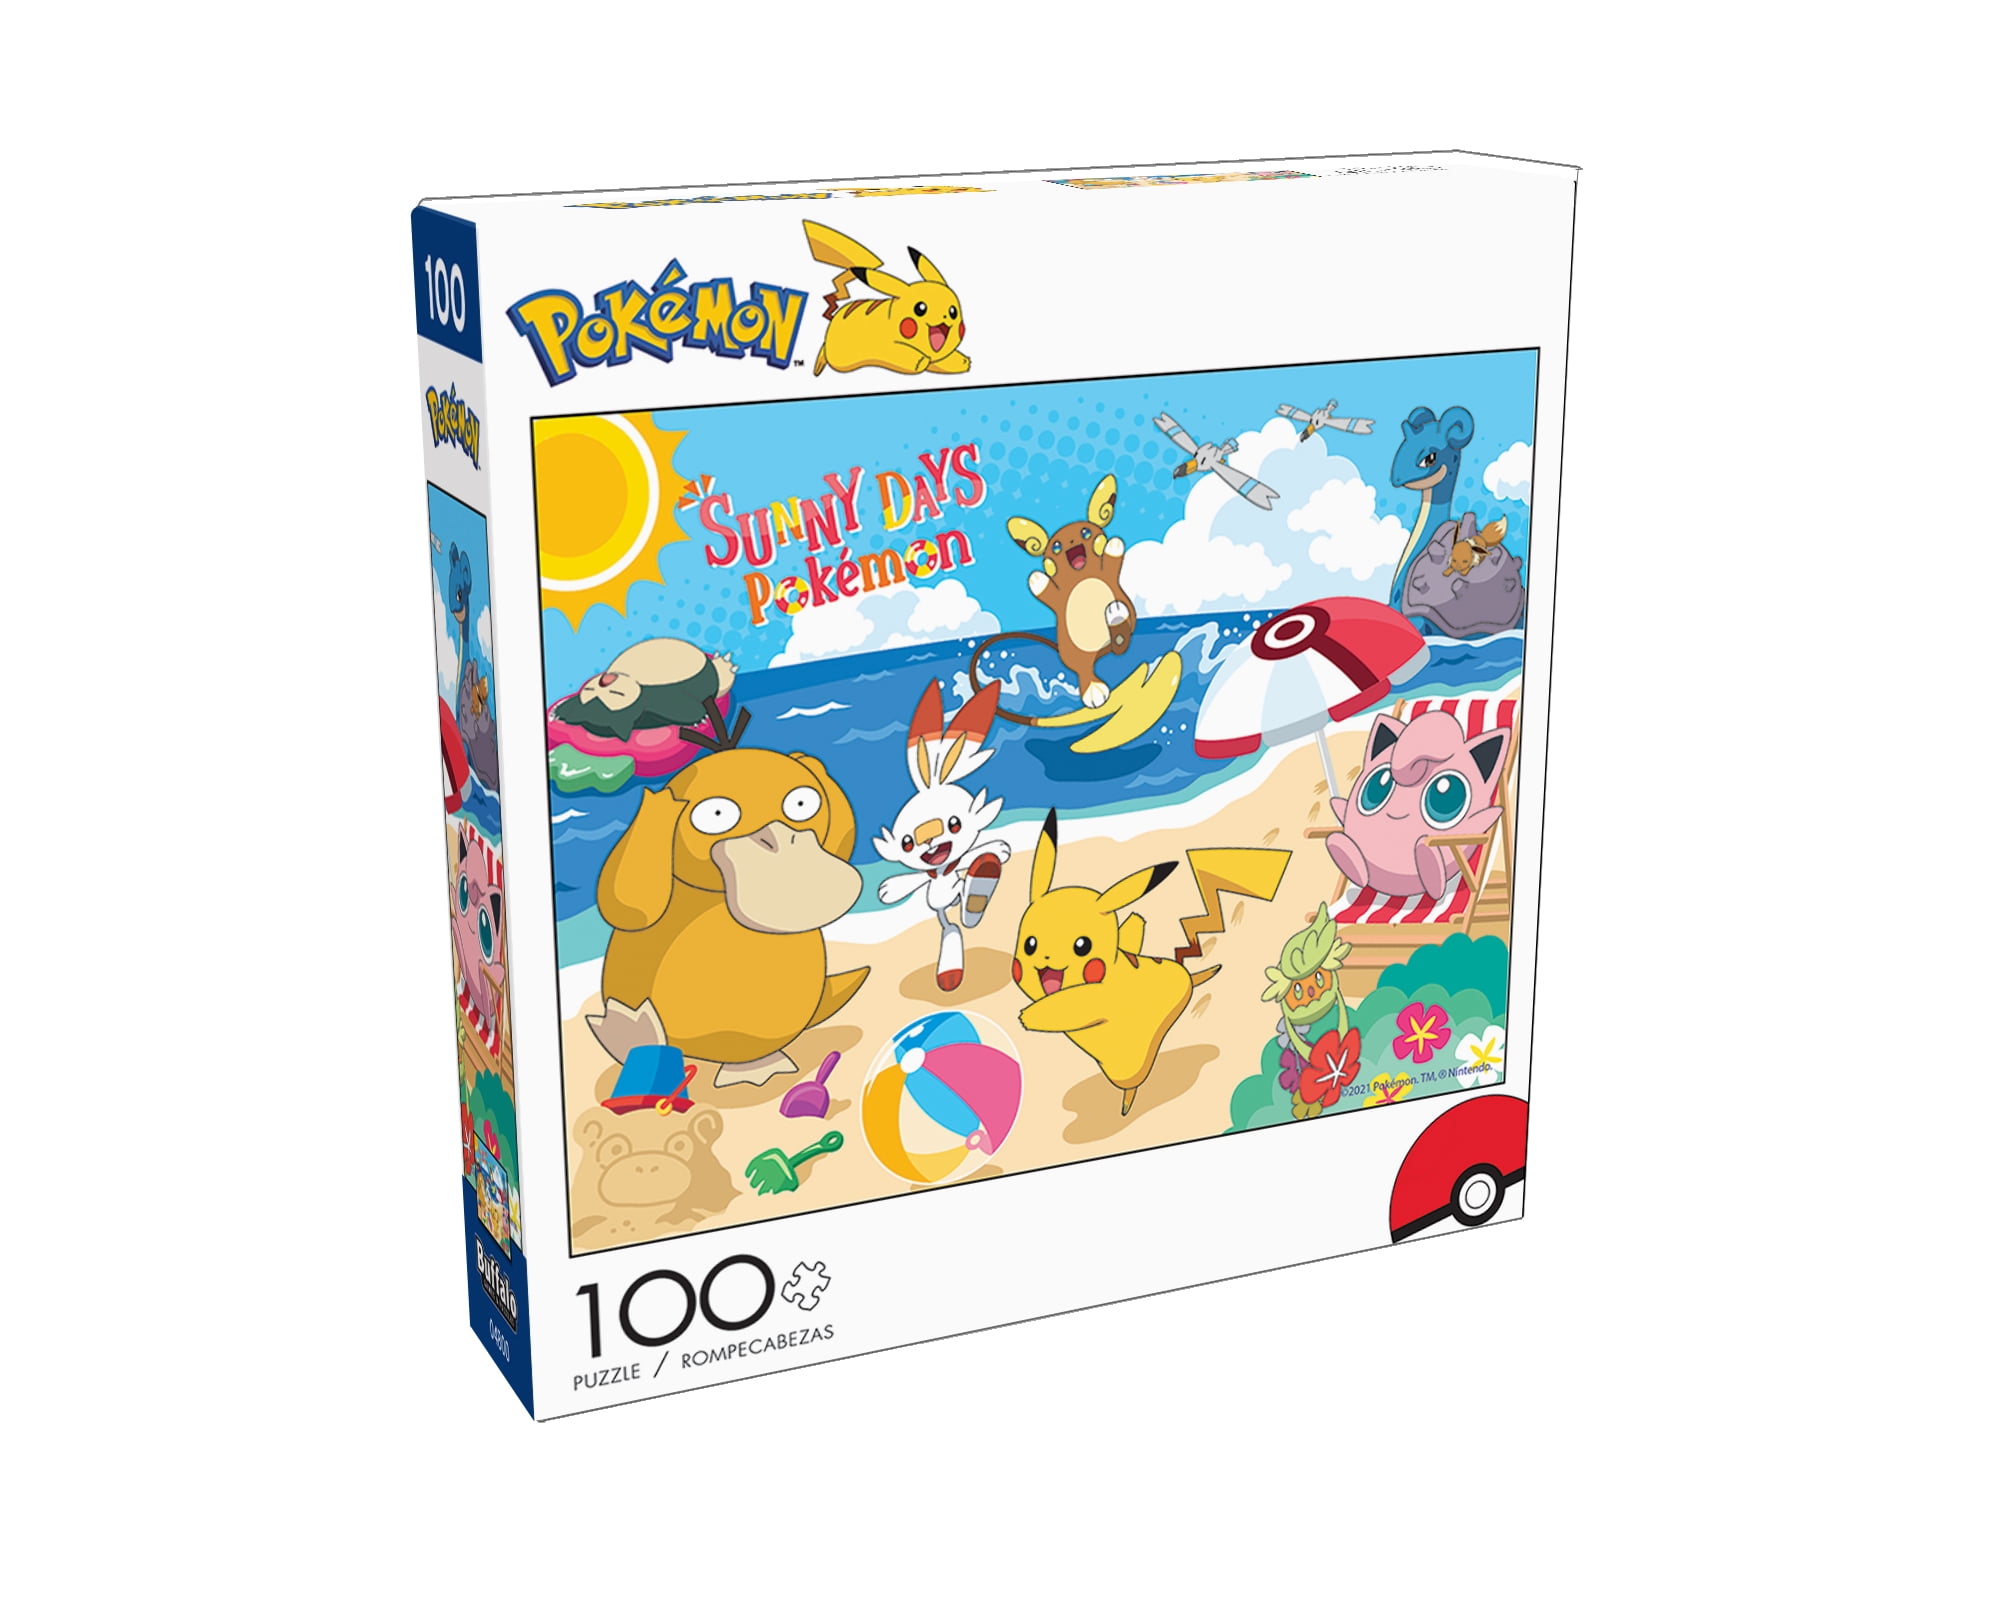  Buffalo Games - Pokemon - Pokemon Alola Region - 100 Piece  Jigsaw Puzzle for Families Challenging Puzzle Perfect for Family Time - 100  Piece Finished Size is 15.00 x 11.00 : Toys & Games